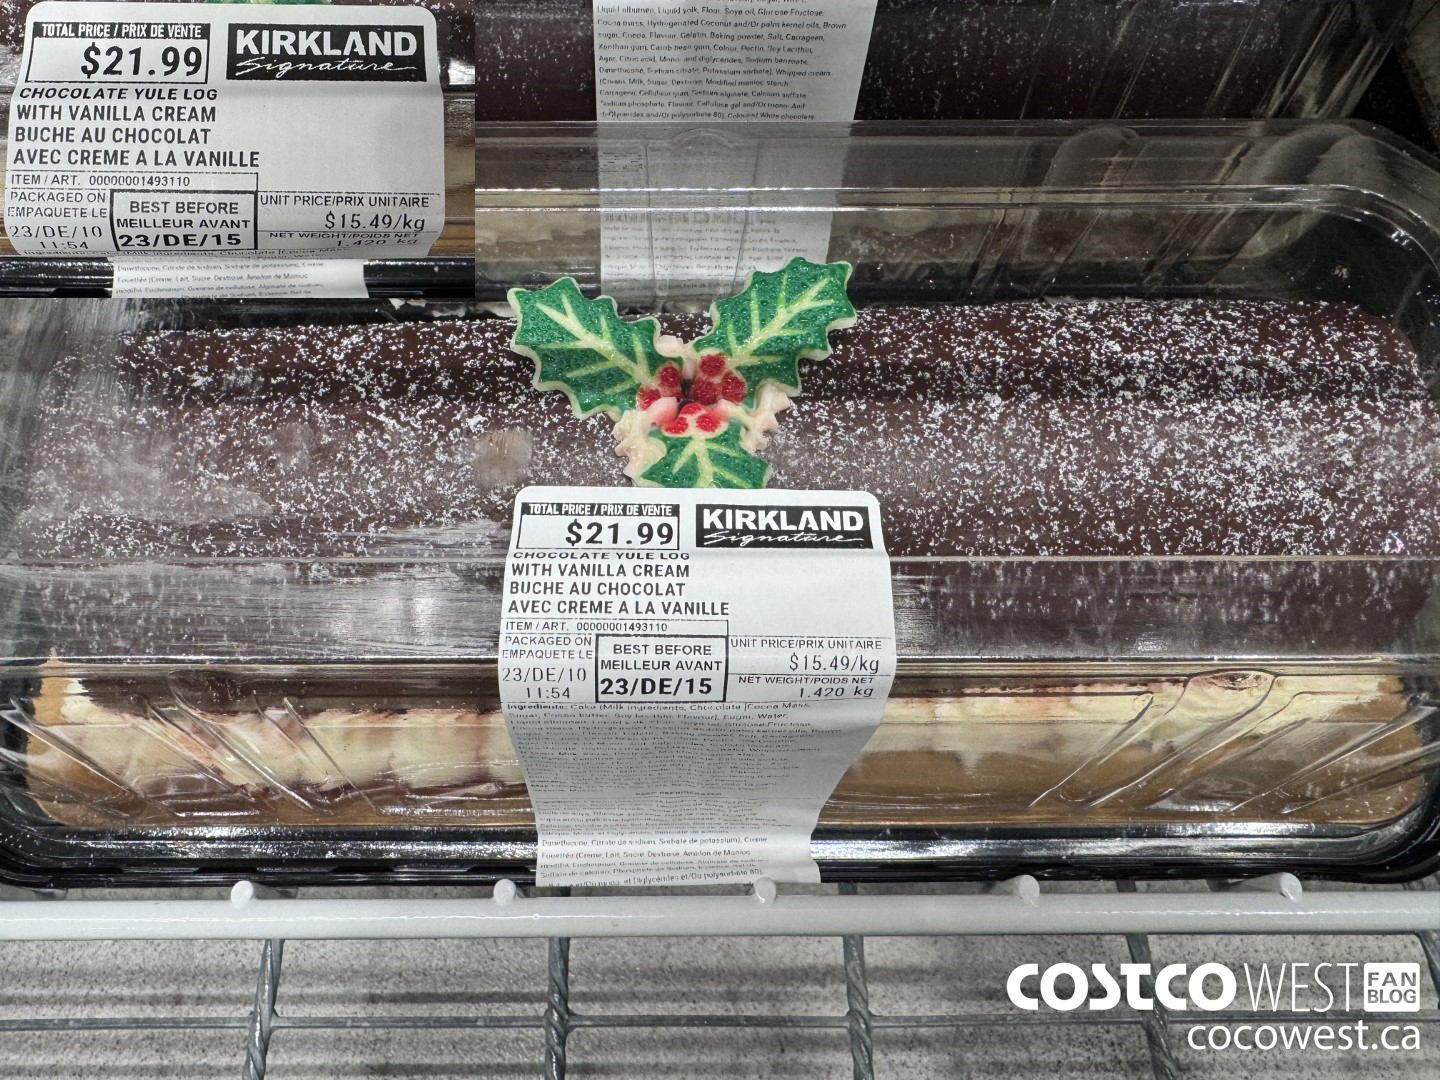 Costco stops selling half-sheet cakes | CNN Business